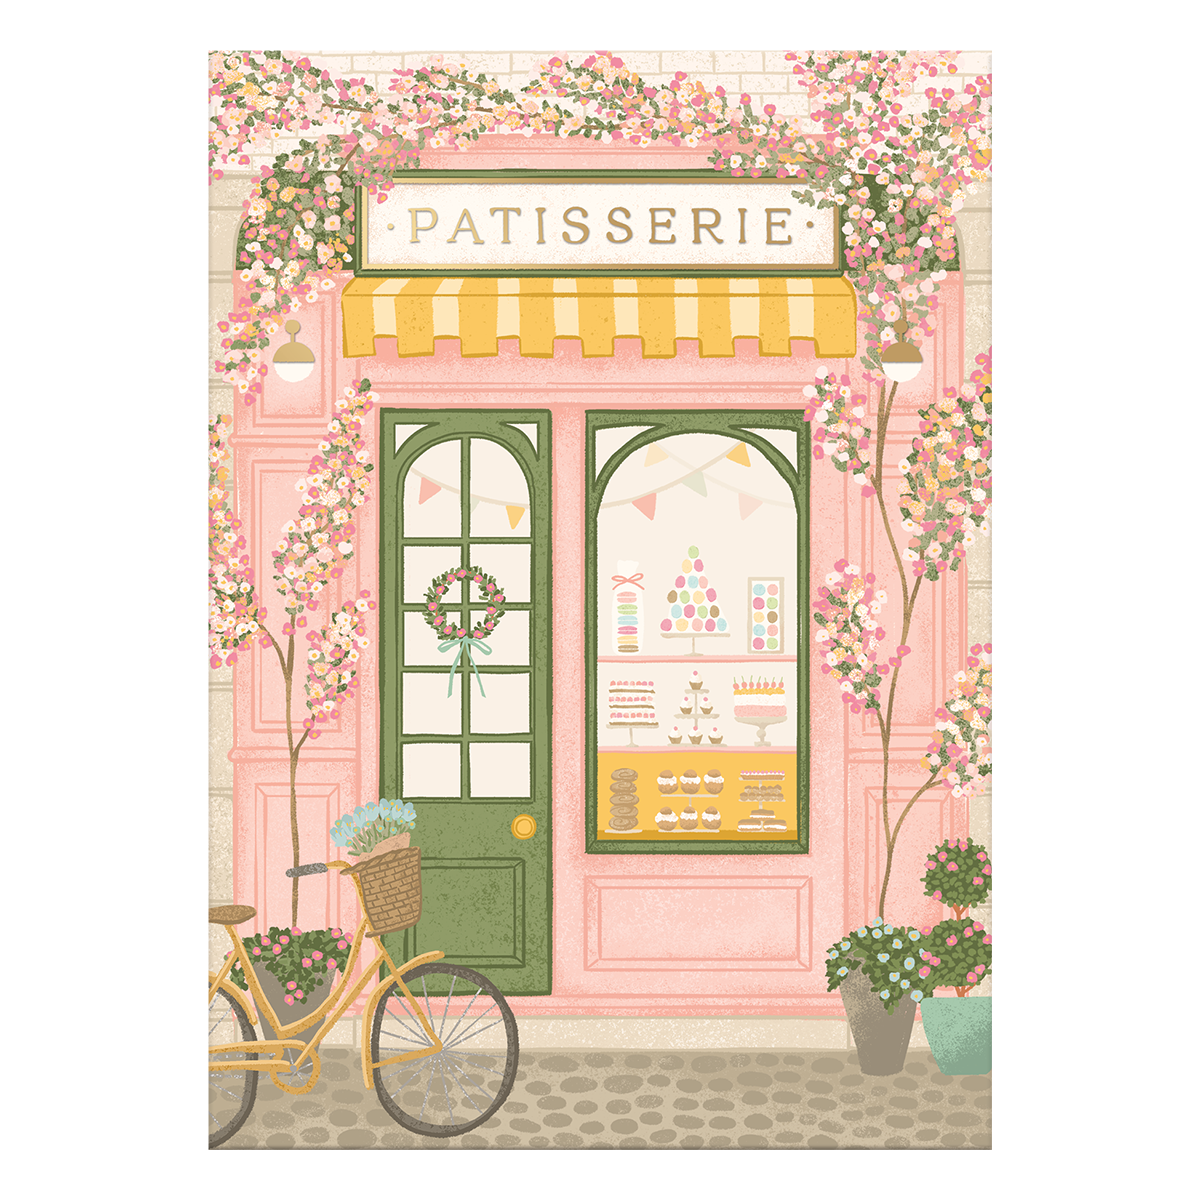 Patisserie Greeting Card Product